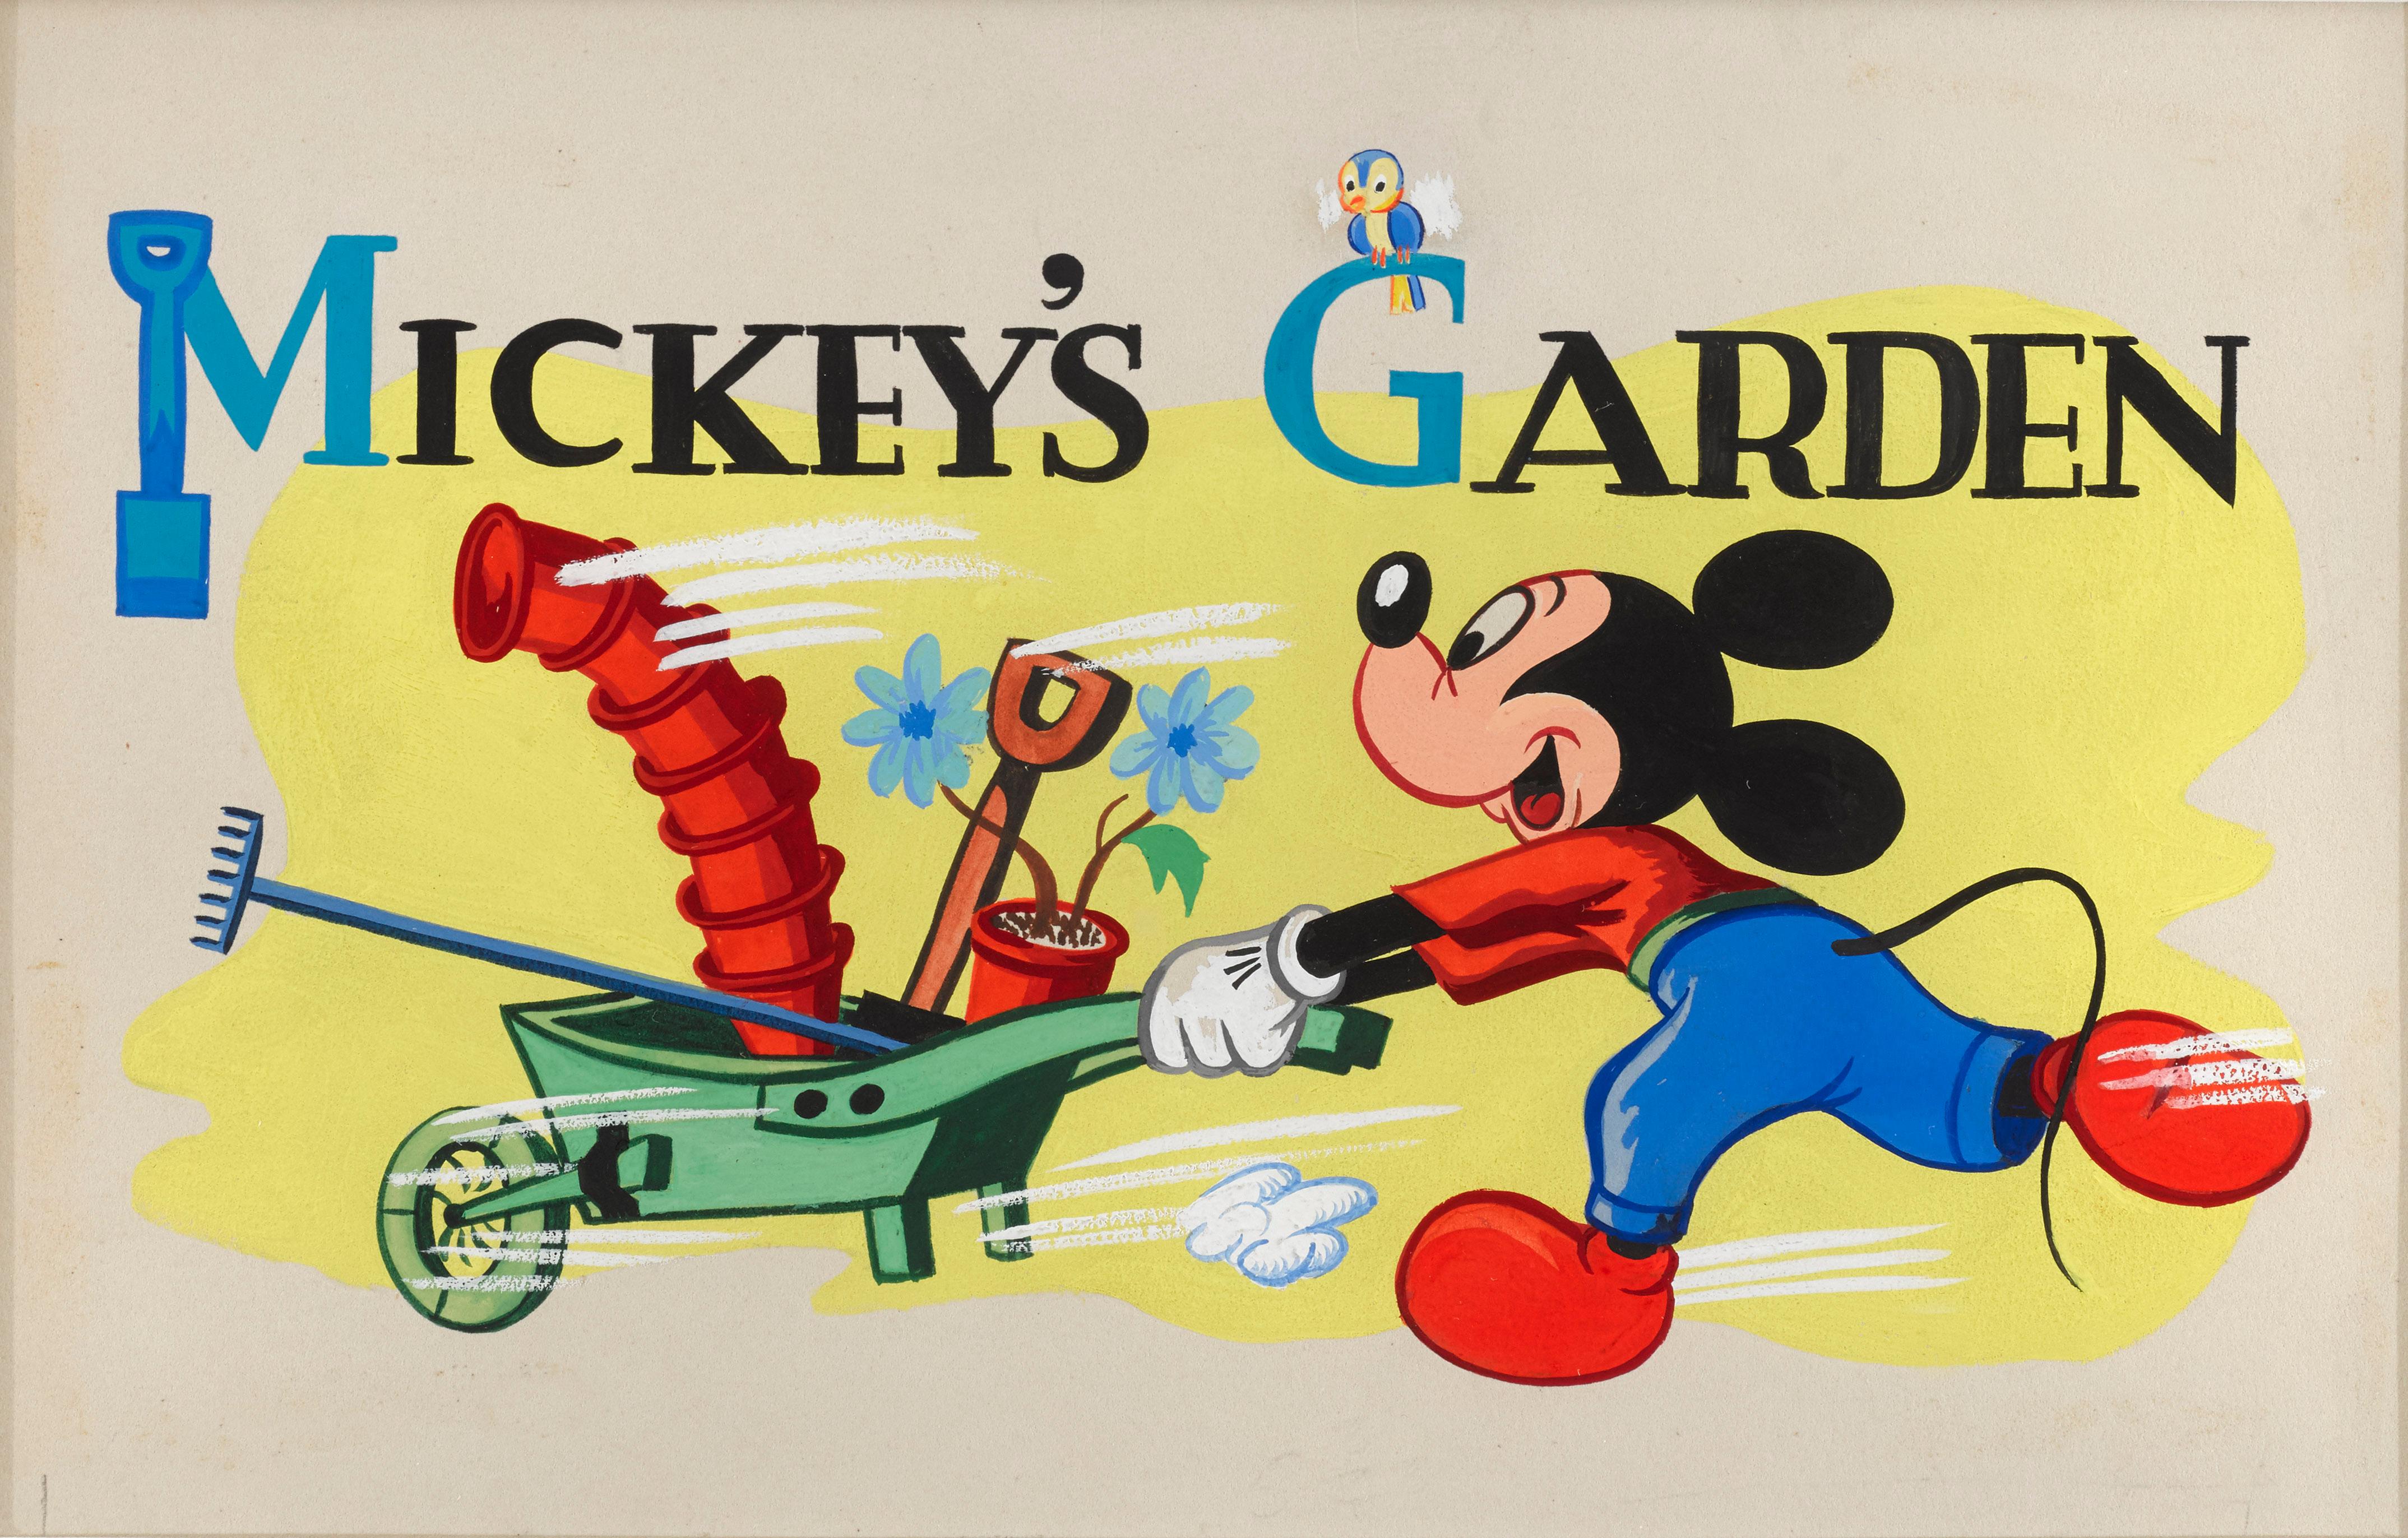 Original artwork ink and gouach
from Mickey Mouse annual, Mickey and Friends 1951 the annual was printed in 1952. This painting was done along side a poem Mickey's Garden found on page 78.
This piece is conservation framed in a Sapele wood frame